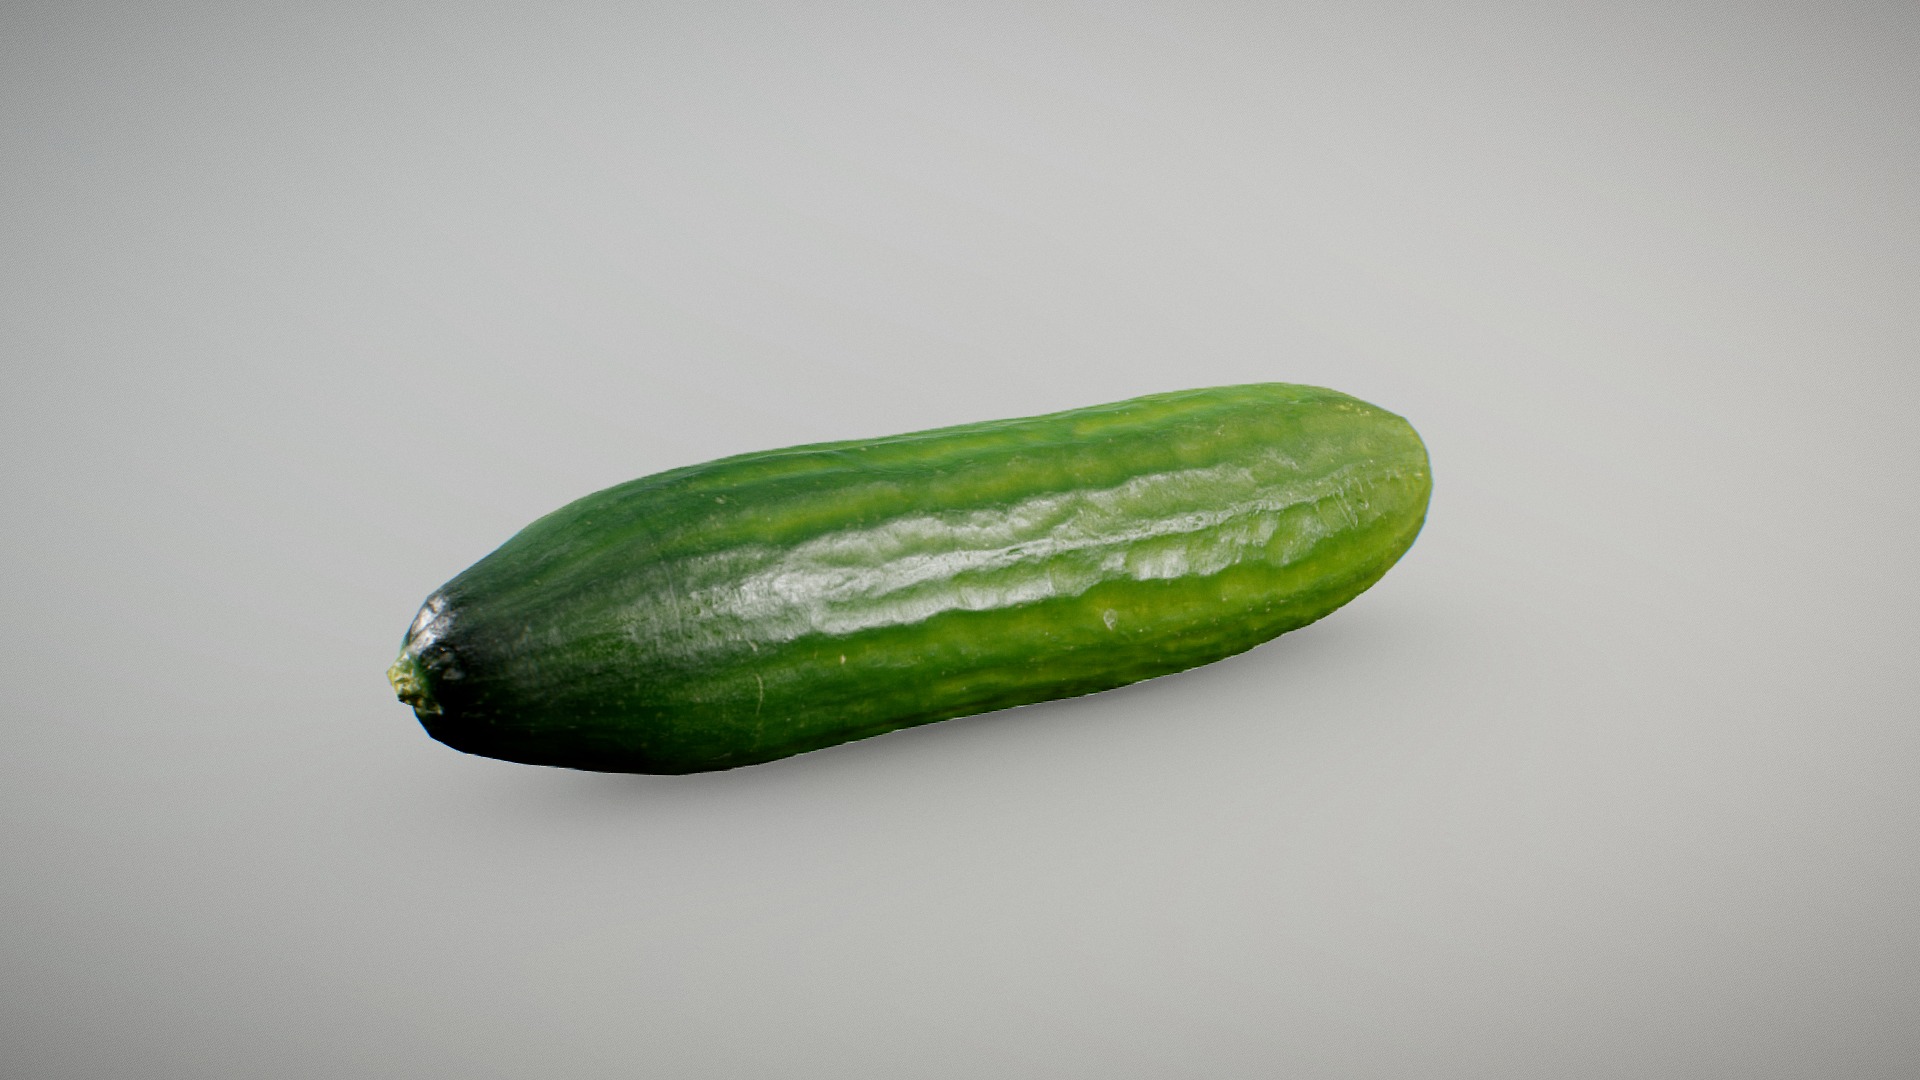 3D model Persian Cucumber - This is a 3D model of the Persian Cucumber. The 3D model is about a green cucumber on a white surface.